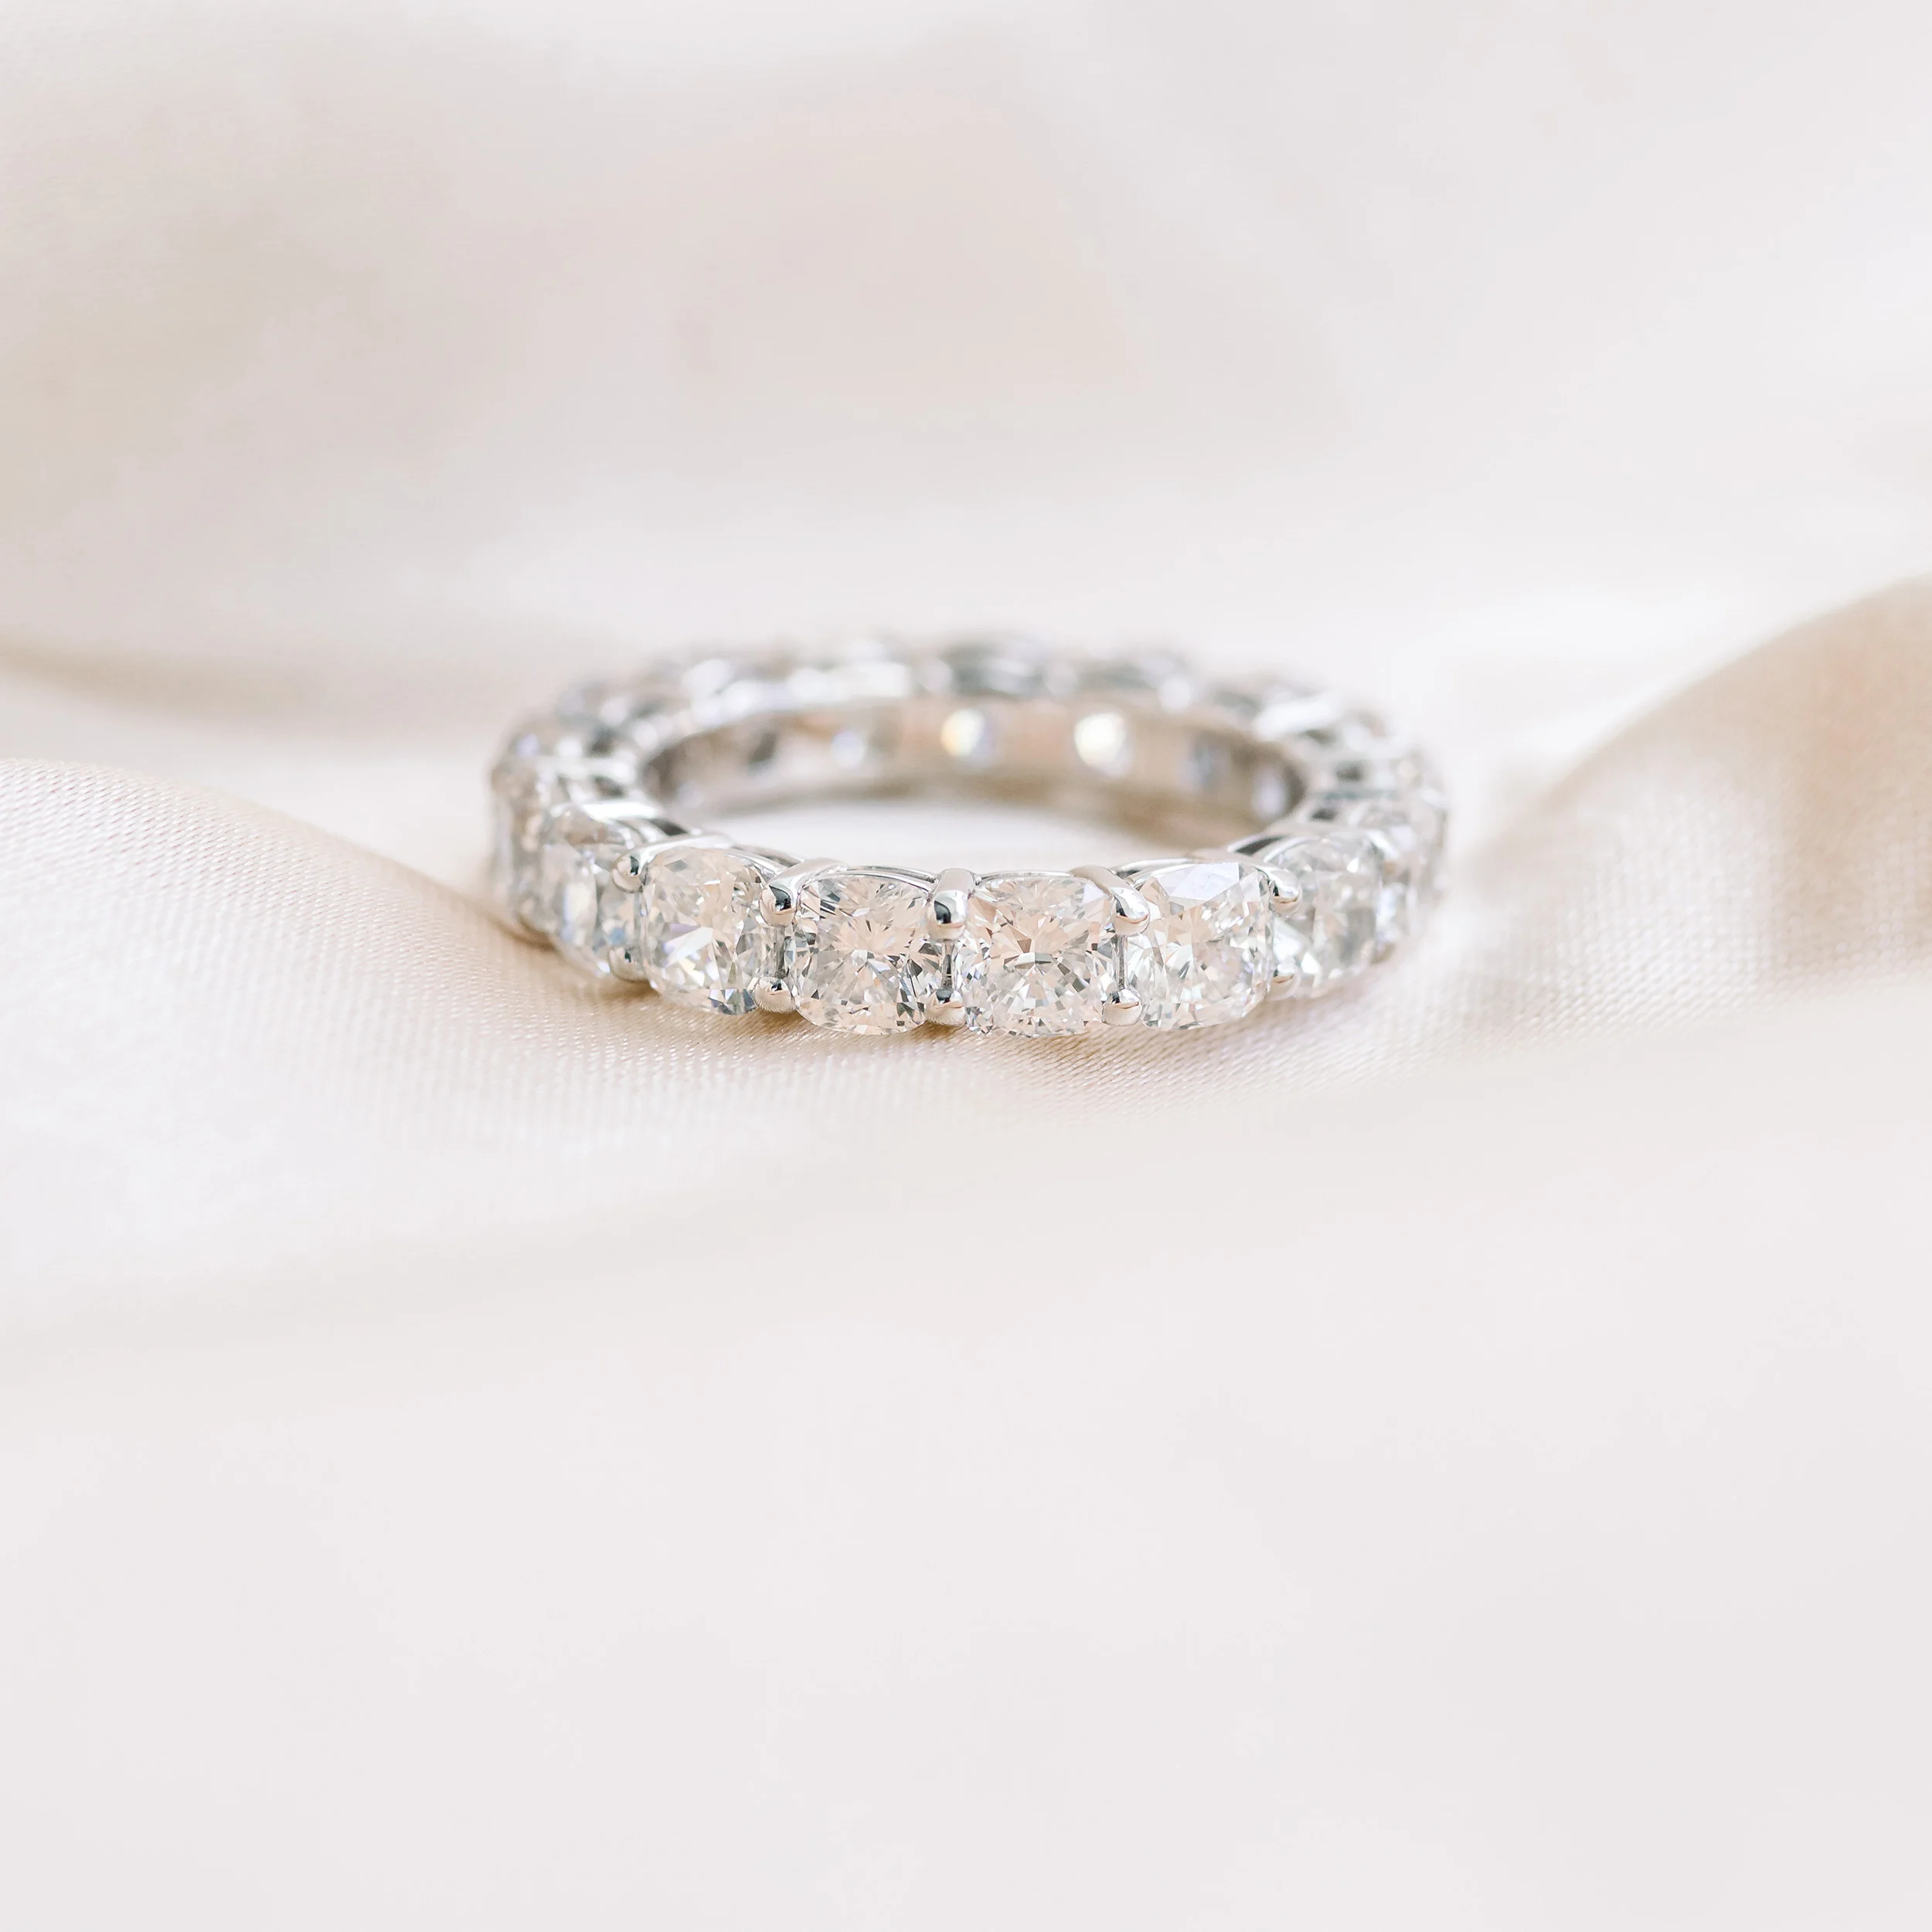 7.0 Carat Diamonds Cushion Eternity Band in 18k White Gold 7ctw in 18k White Gold (Main View)